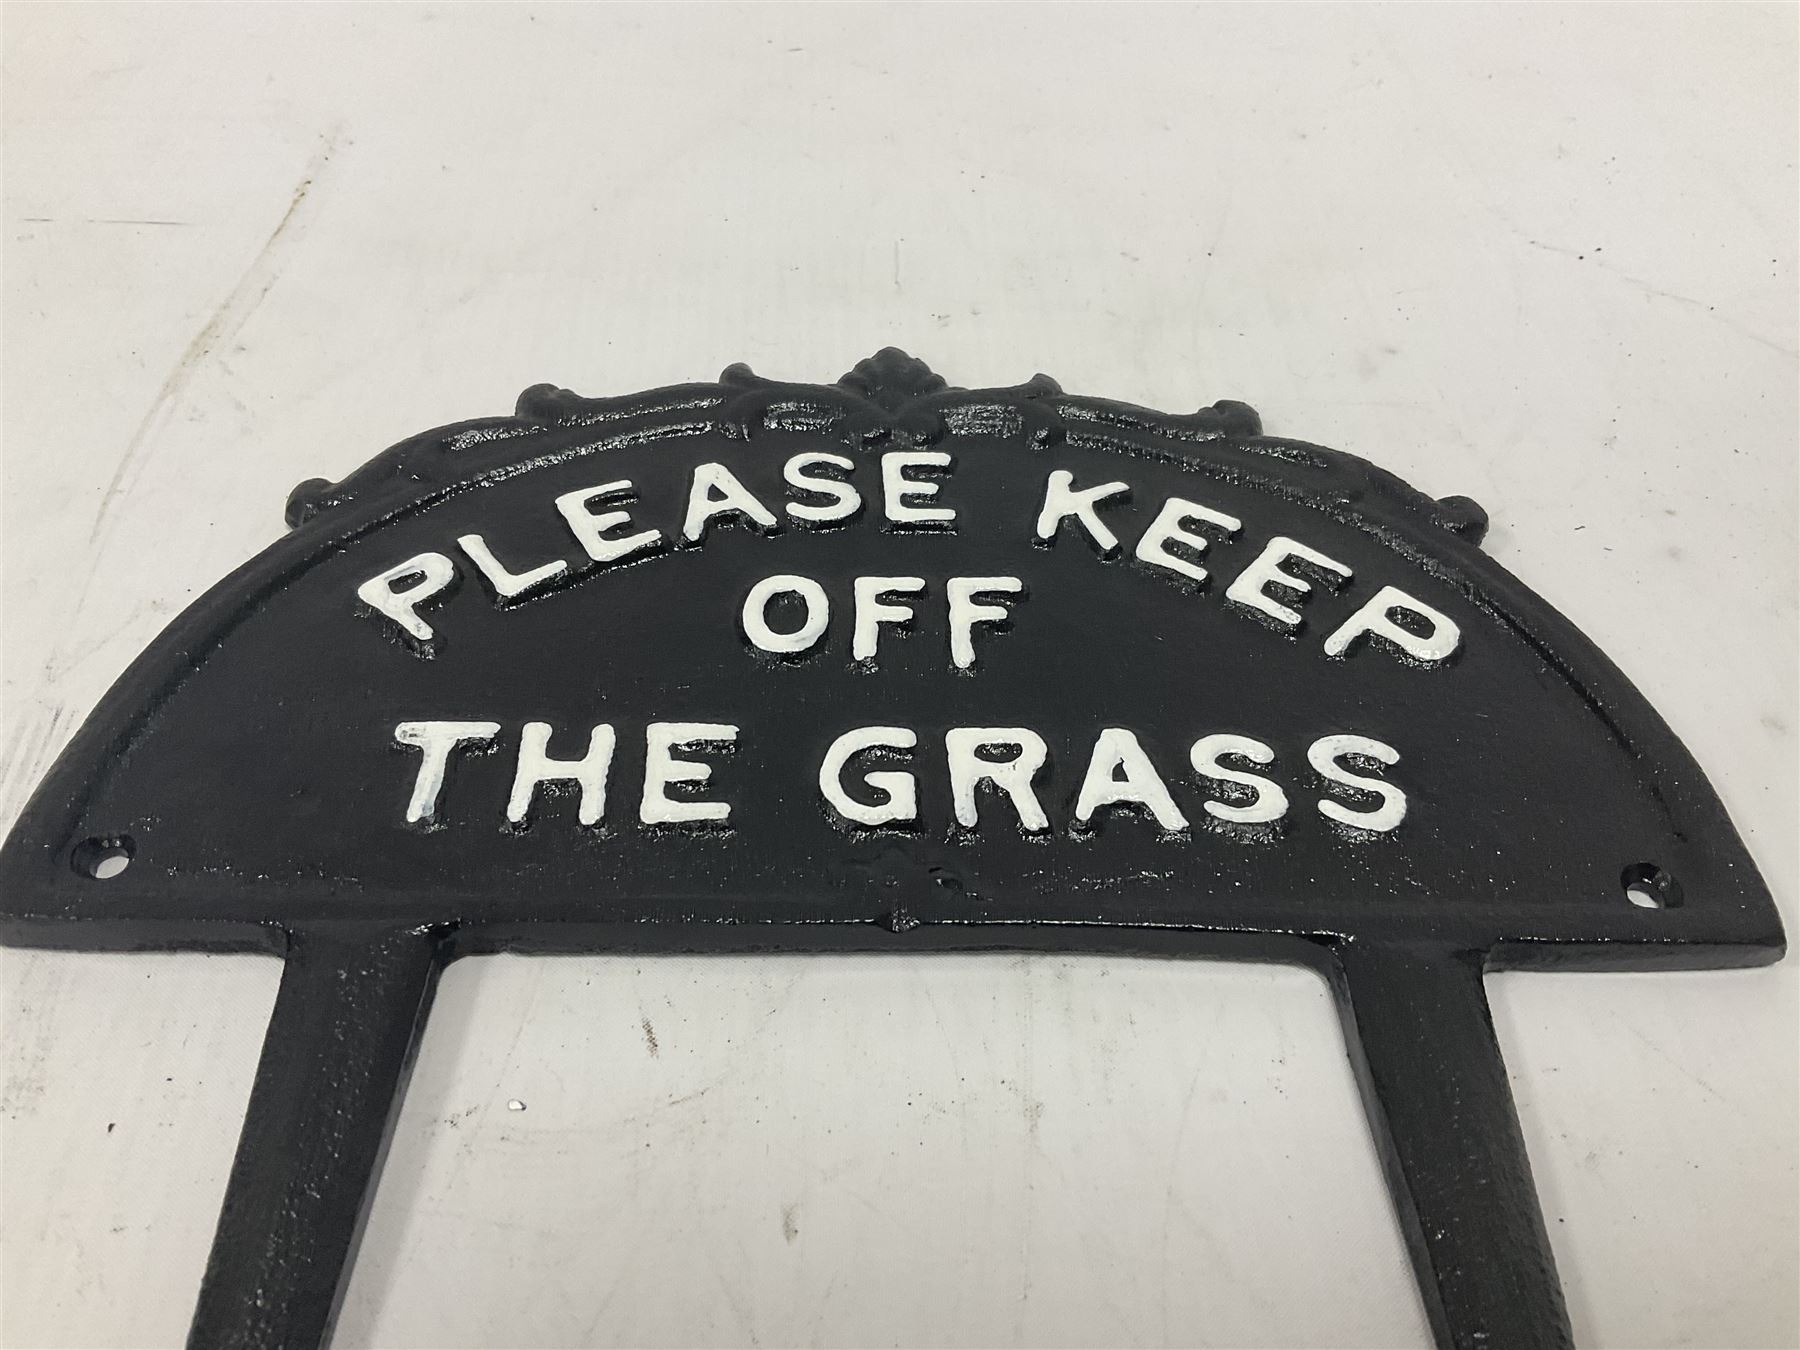 Please Keep Off the Grass cast iron sign - Image 3 of 4